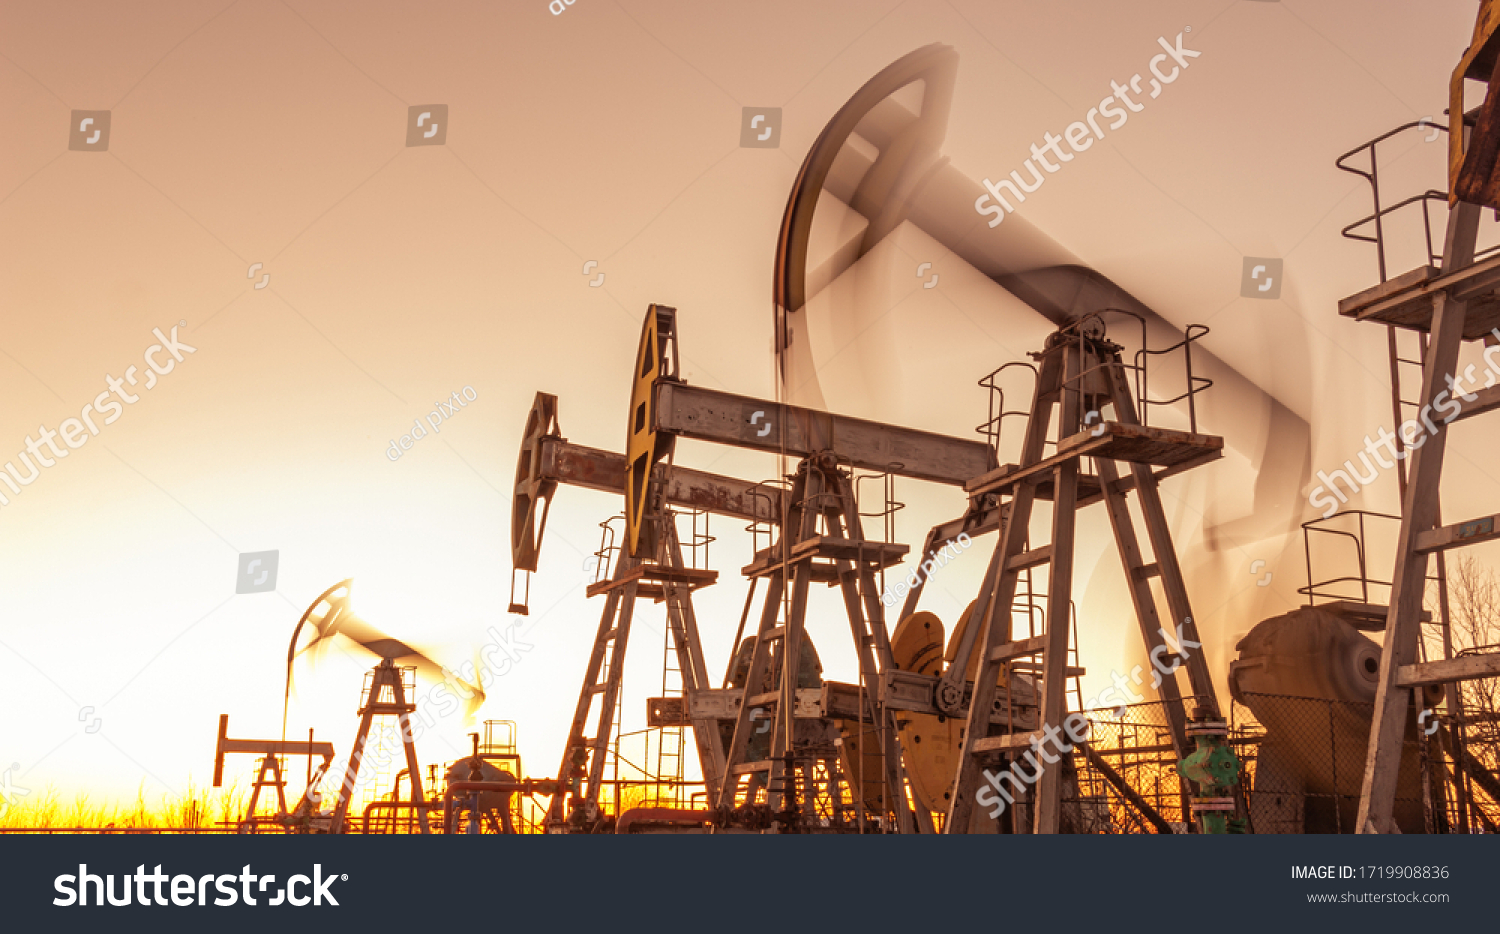 Oil pump rig. Oil and gas production. Oilfield site. Pump Jack are running. Drilling derricks for fossil fuels output and crude oil production. War on oil prices. Global coronavirus COVID 19 crisis. #1719908836